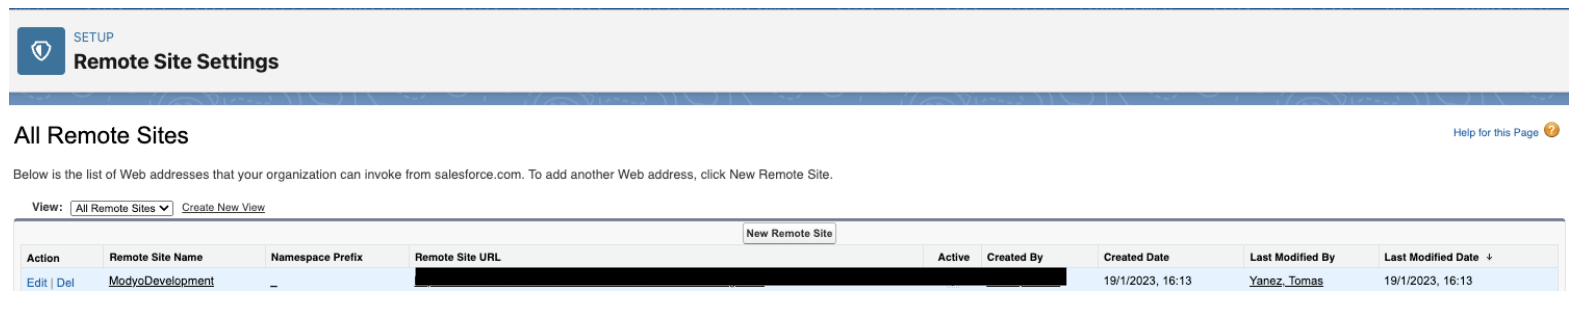 Image with Remote Site flow in Salesforce